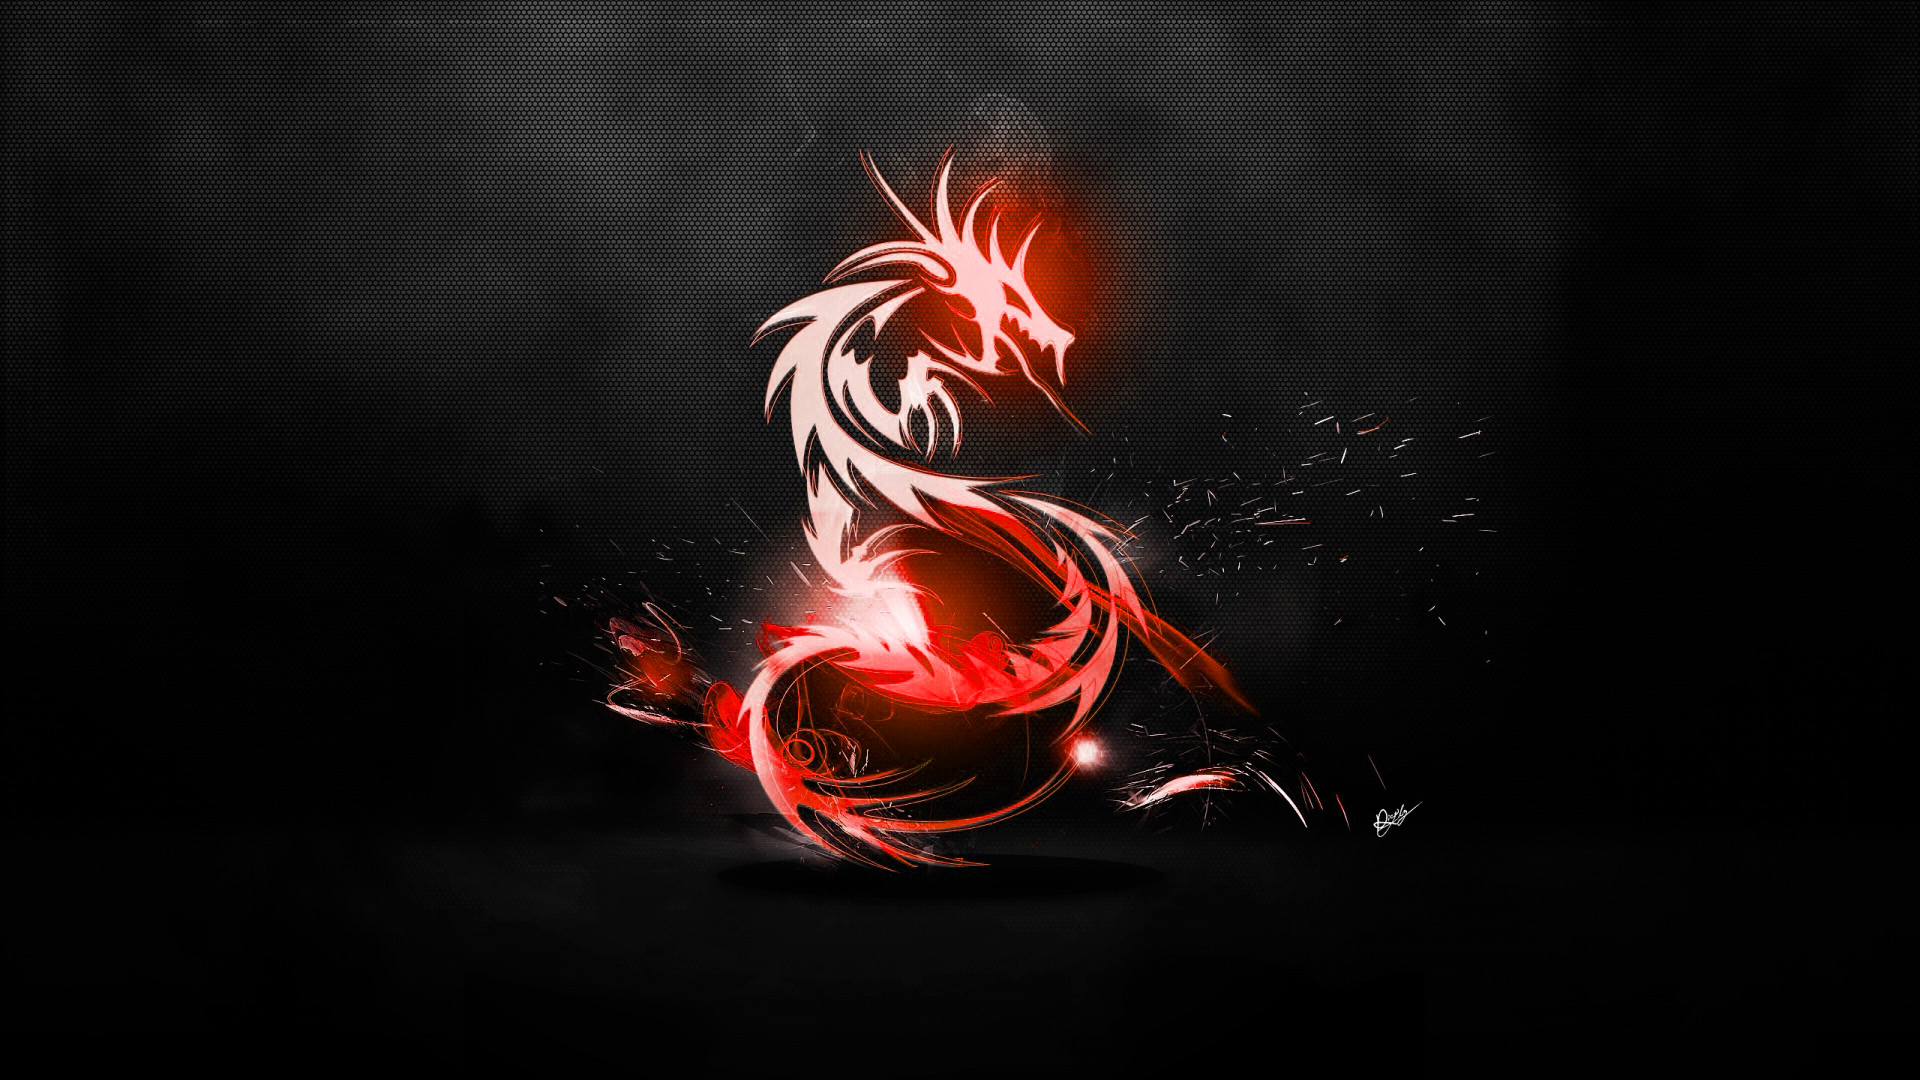 1920x1080 4k Red And Black Wallpaper Black And Red Dragon Wallpaper